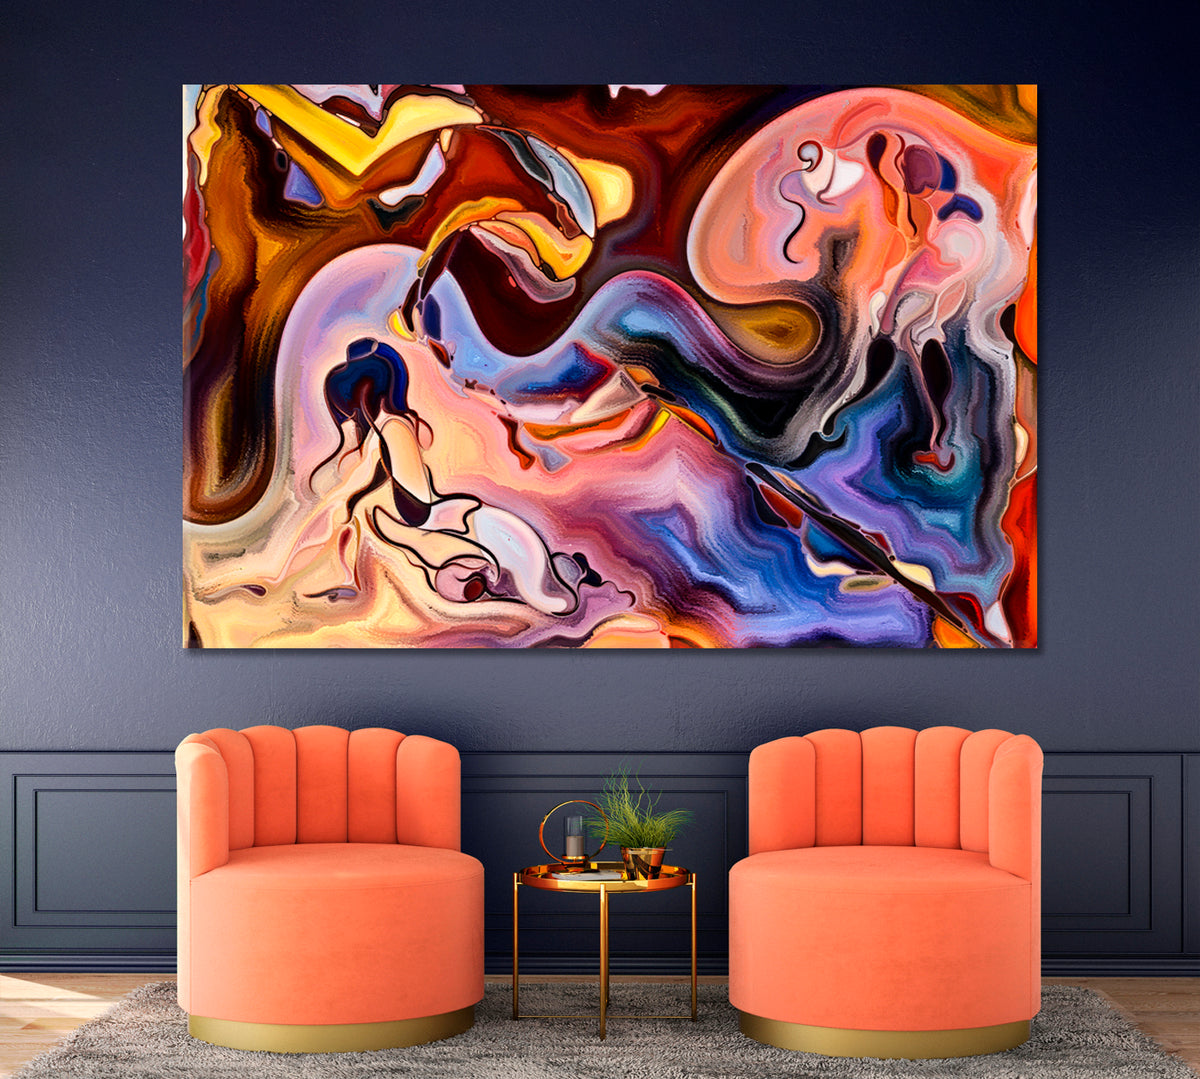 ABSTRACT VARIETY Contemporary Abstraction Contemporary Art Artesty 1 panel 24" x 16" 